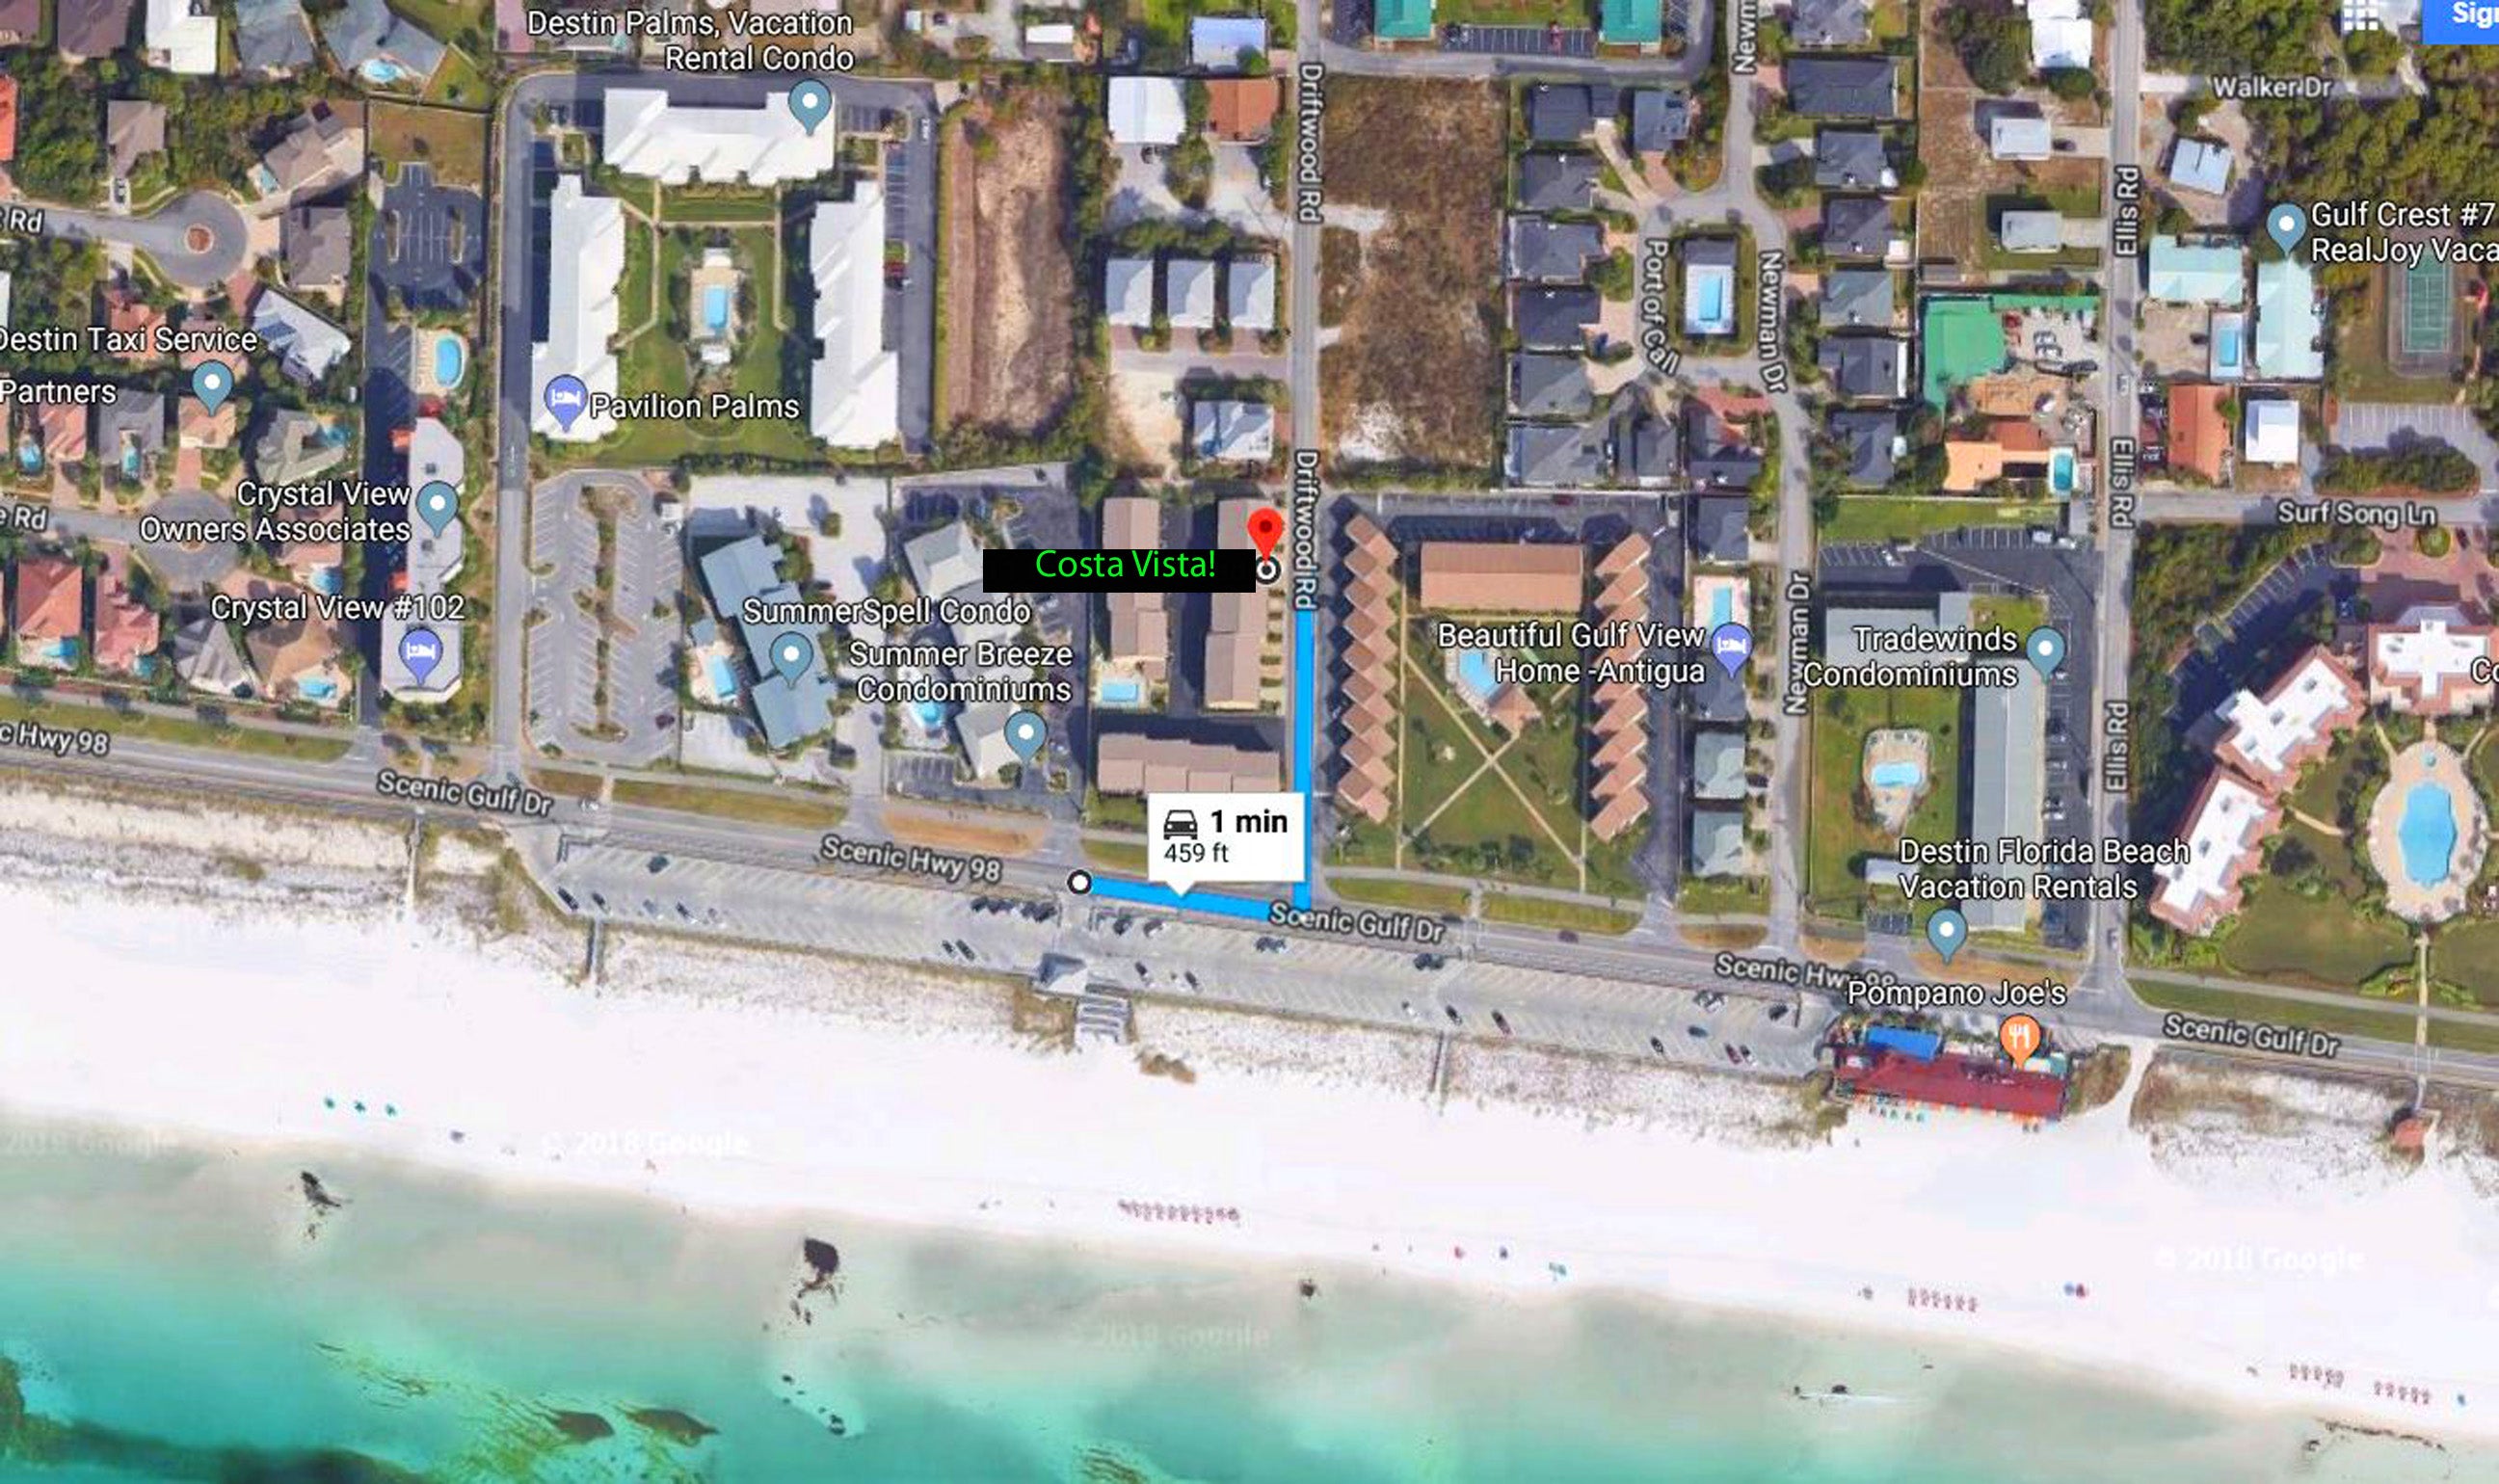 Close to the Beach access and Pompano Joes!